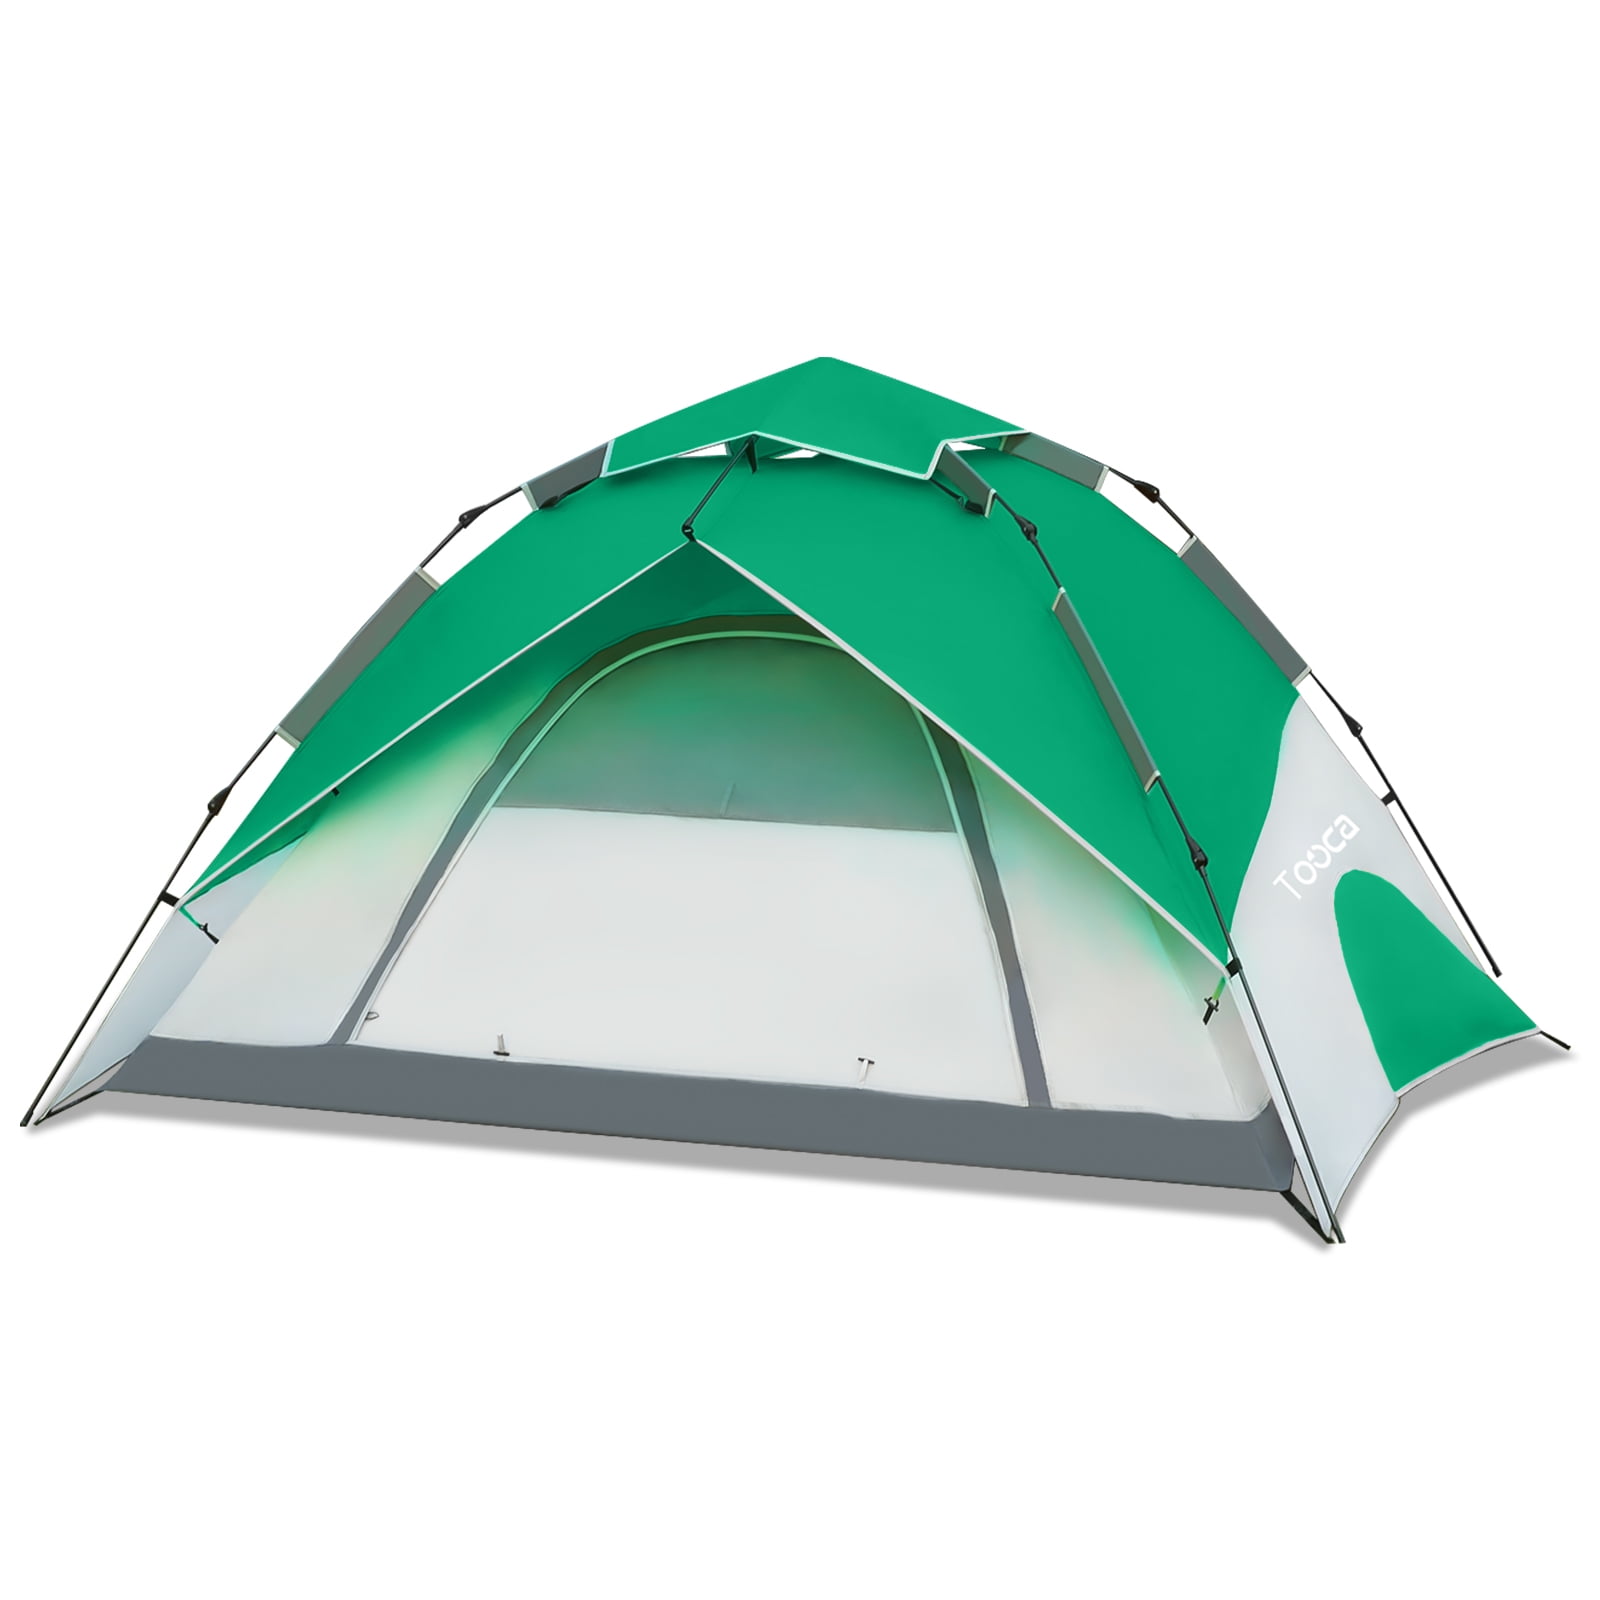 Details about   Ubon 2-3 Person Pop up Tent Instant Tent Lightweight Backpacking Tent Camping 